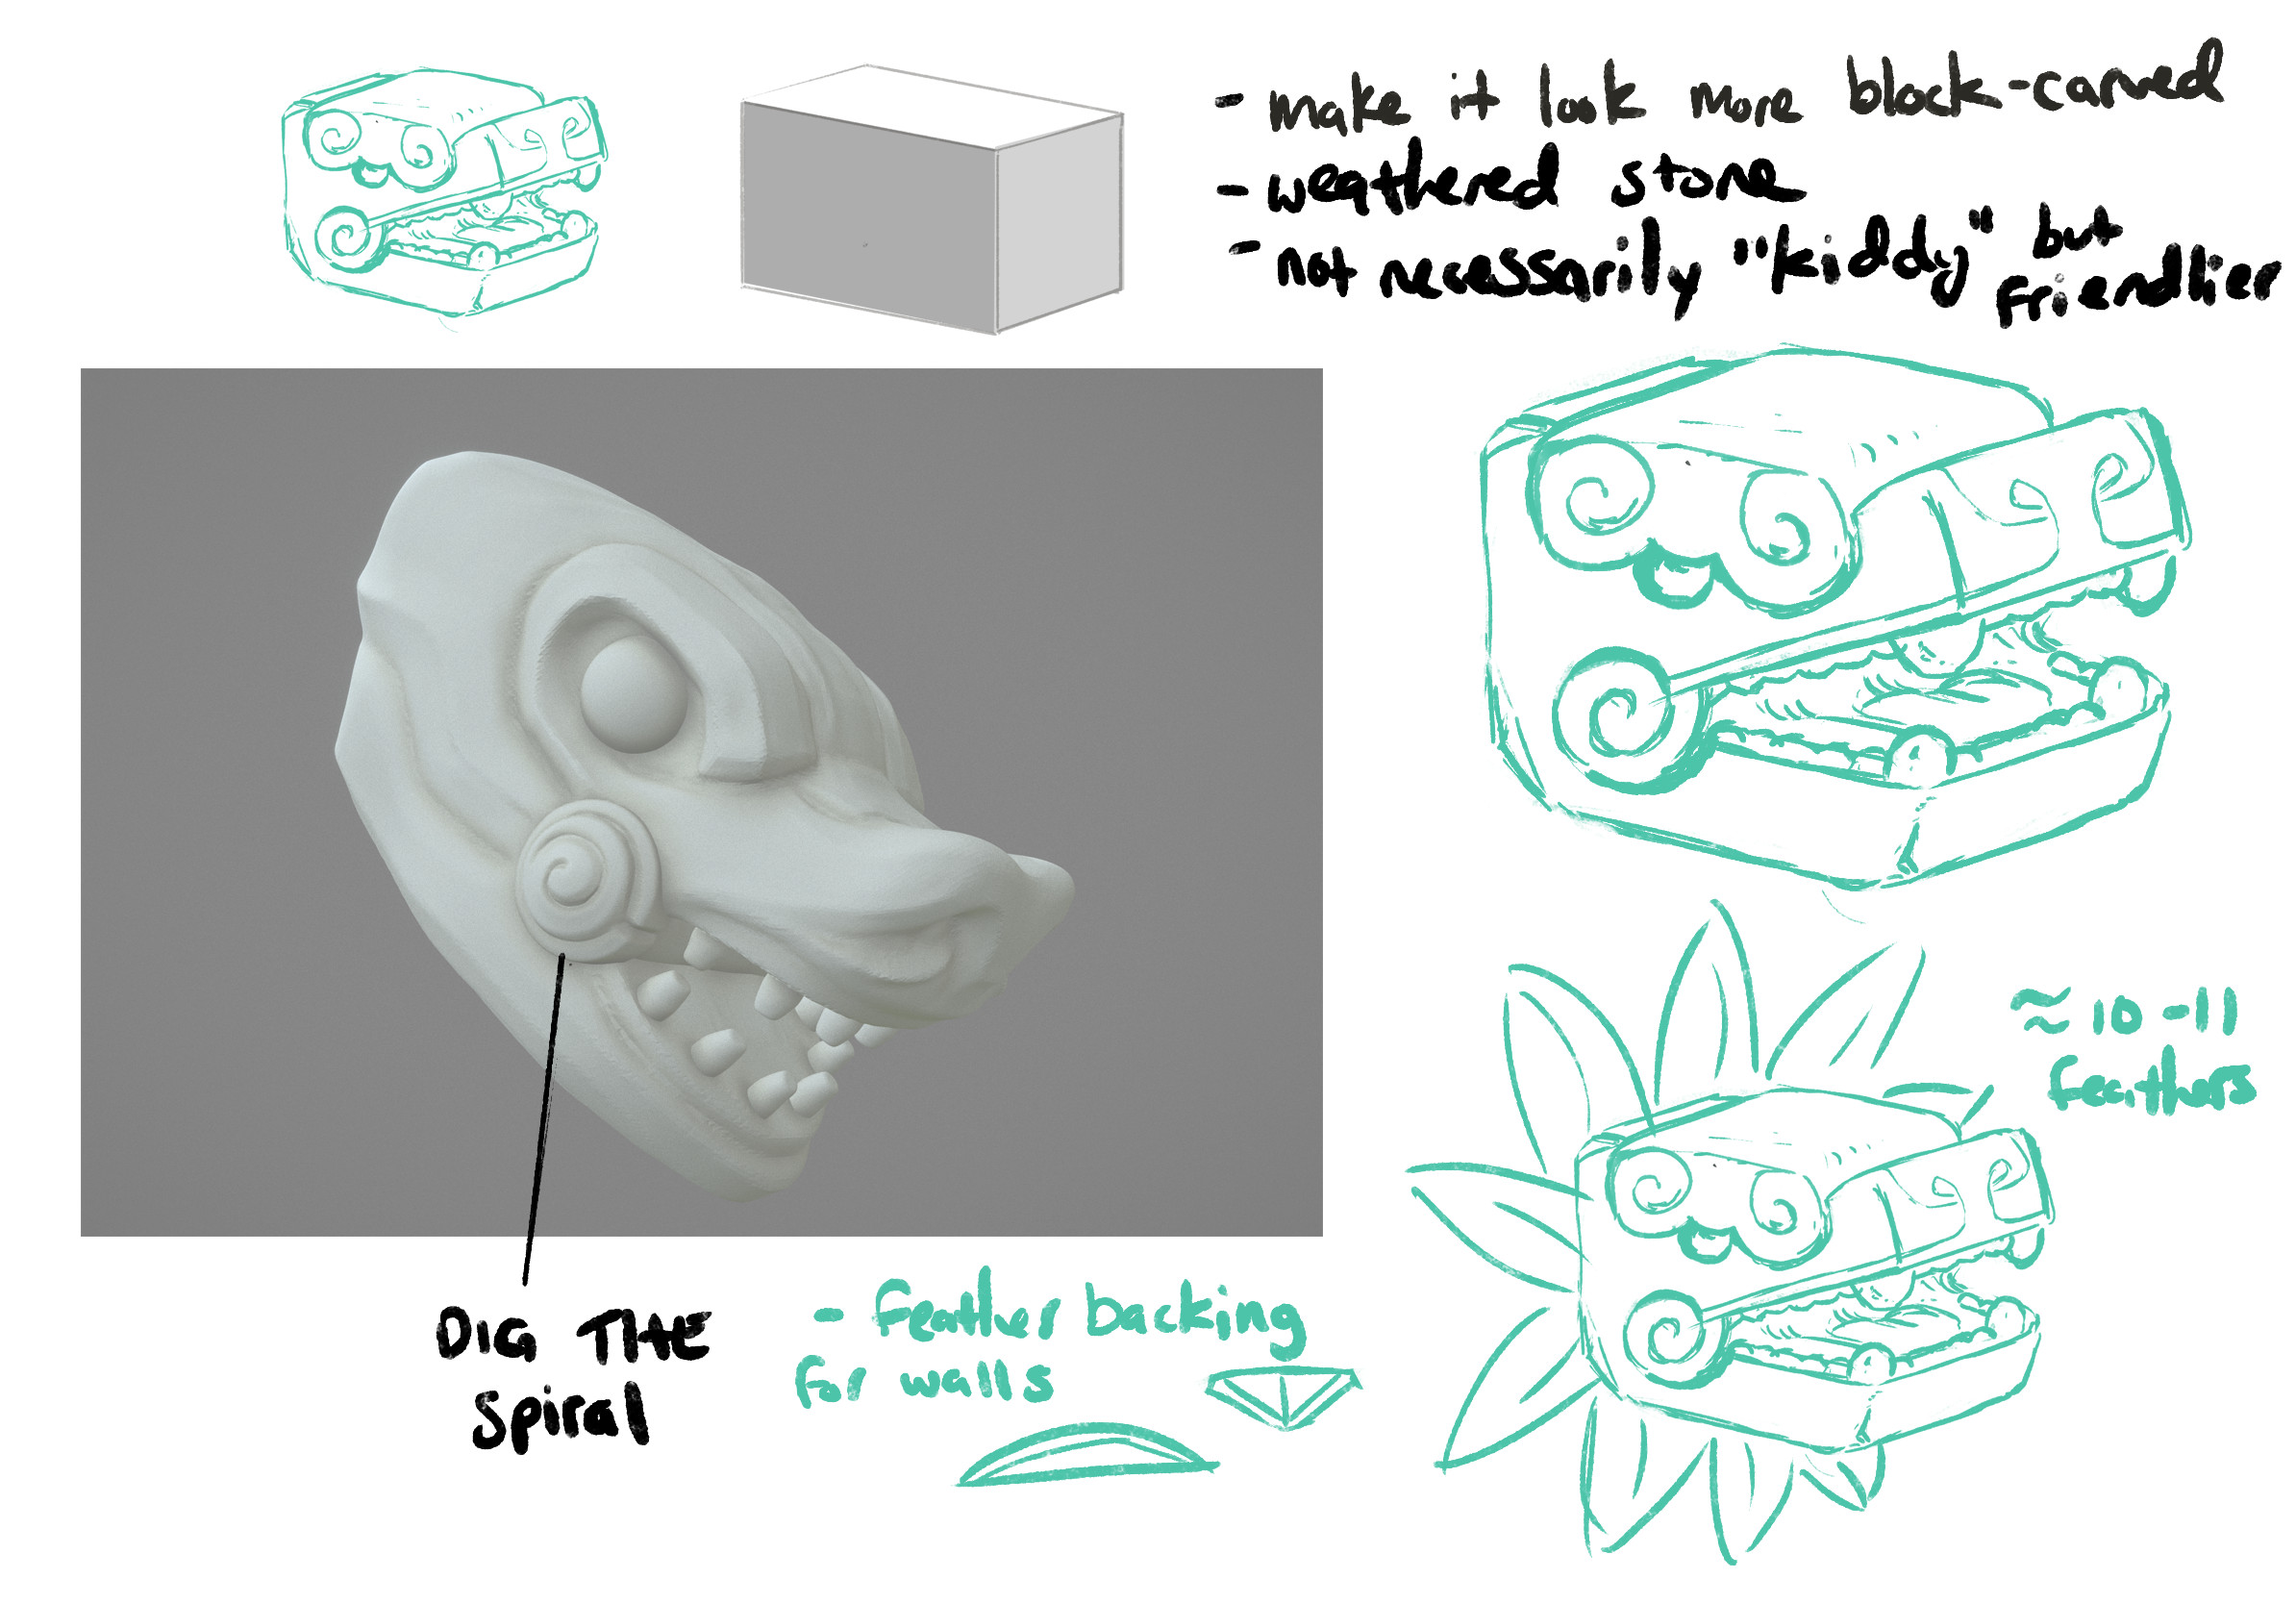 Notes to the 3d modeler